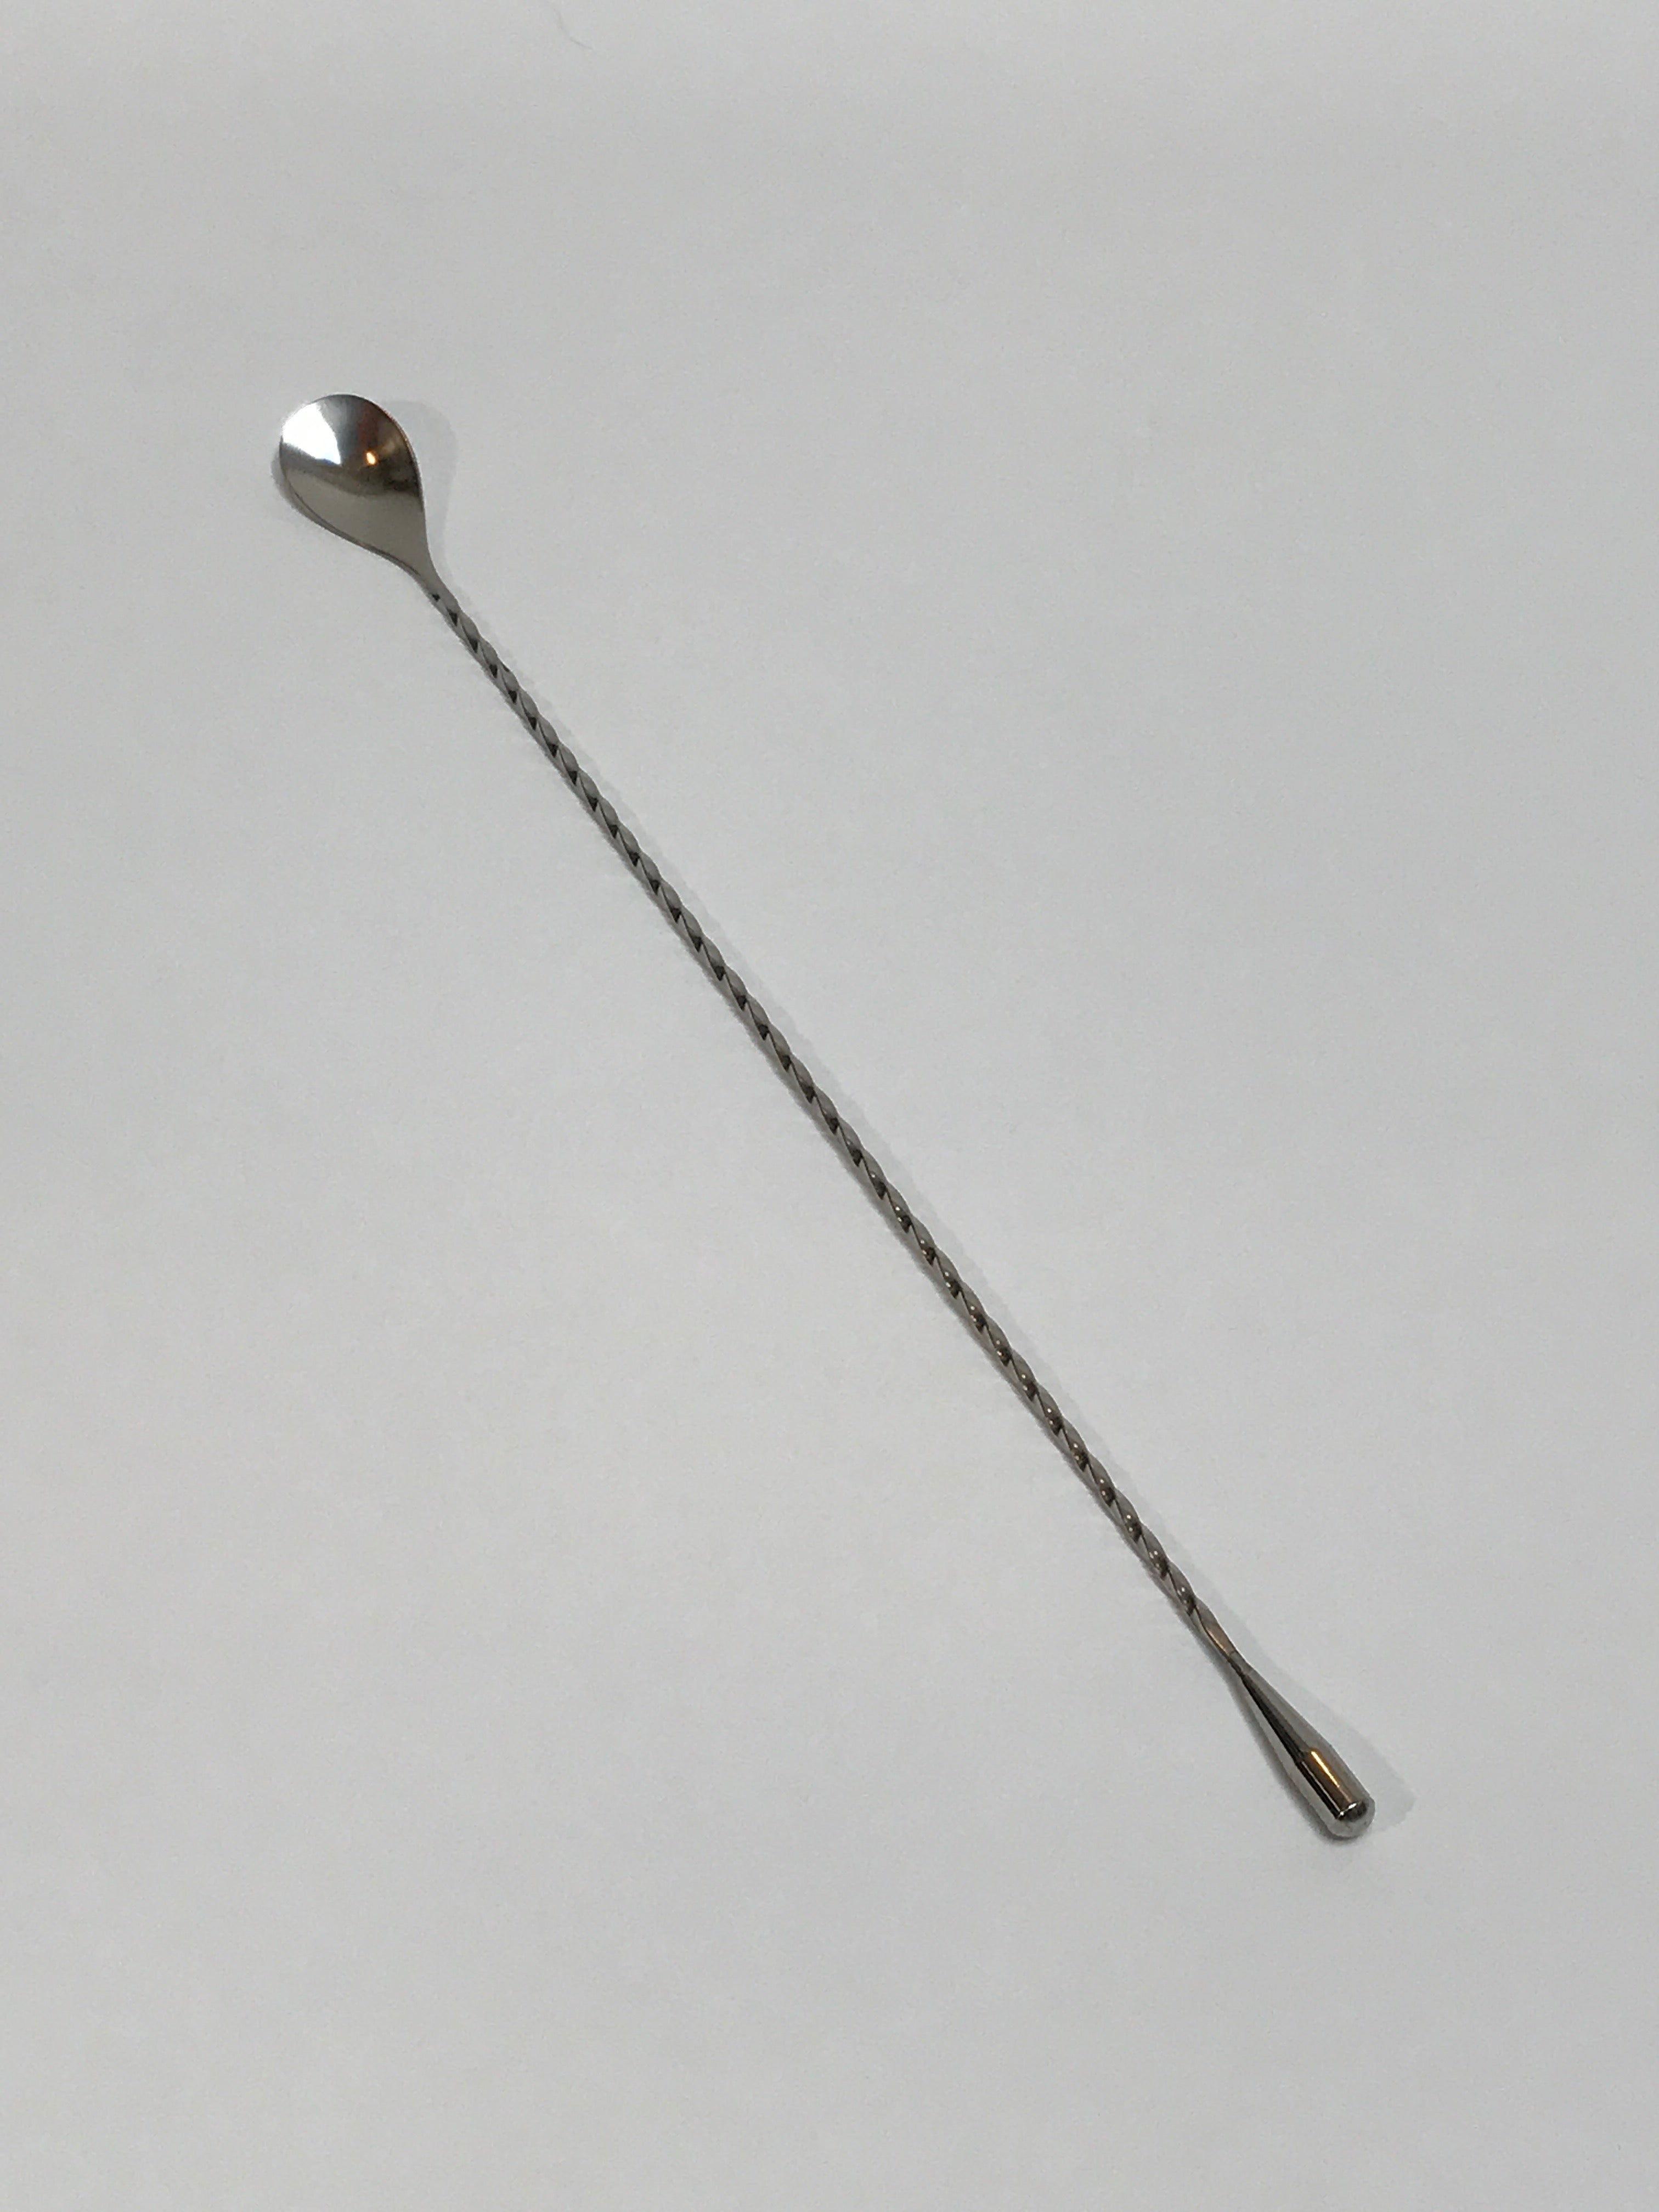 Stainless Weighted Barspoon